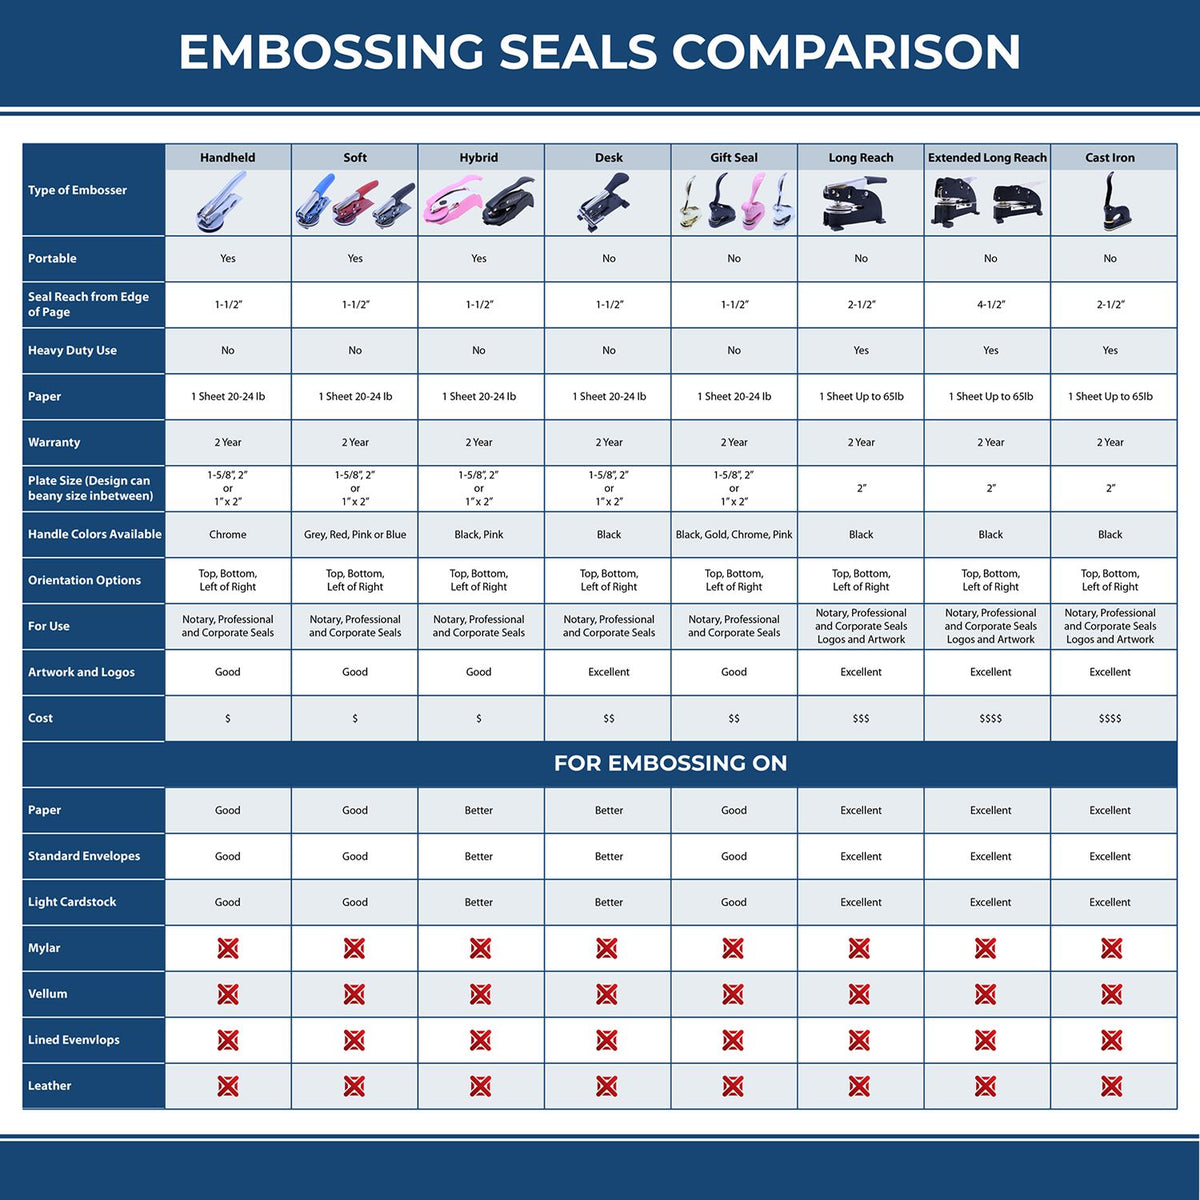 A comparison chart for the different types of mount models available for the State of New York Extended Long Reach Engineer Seal.